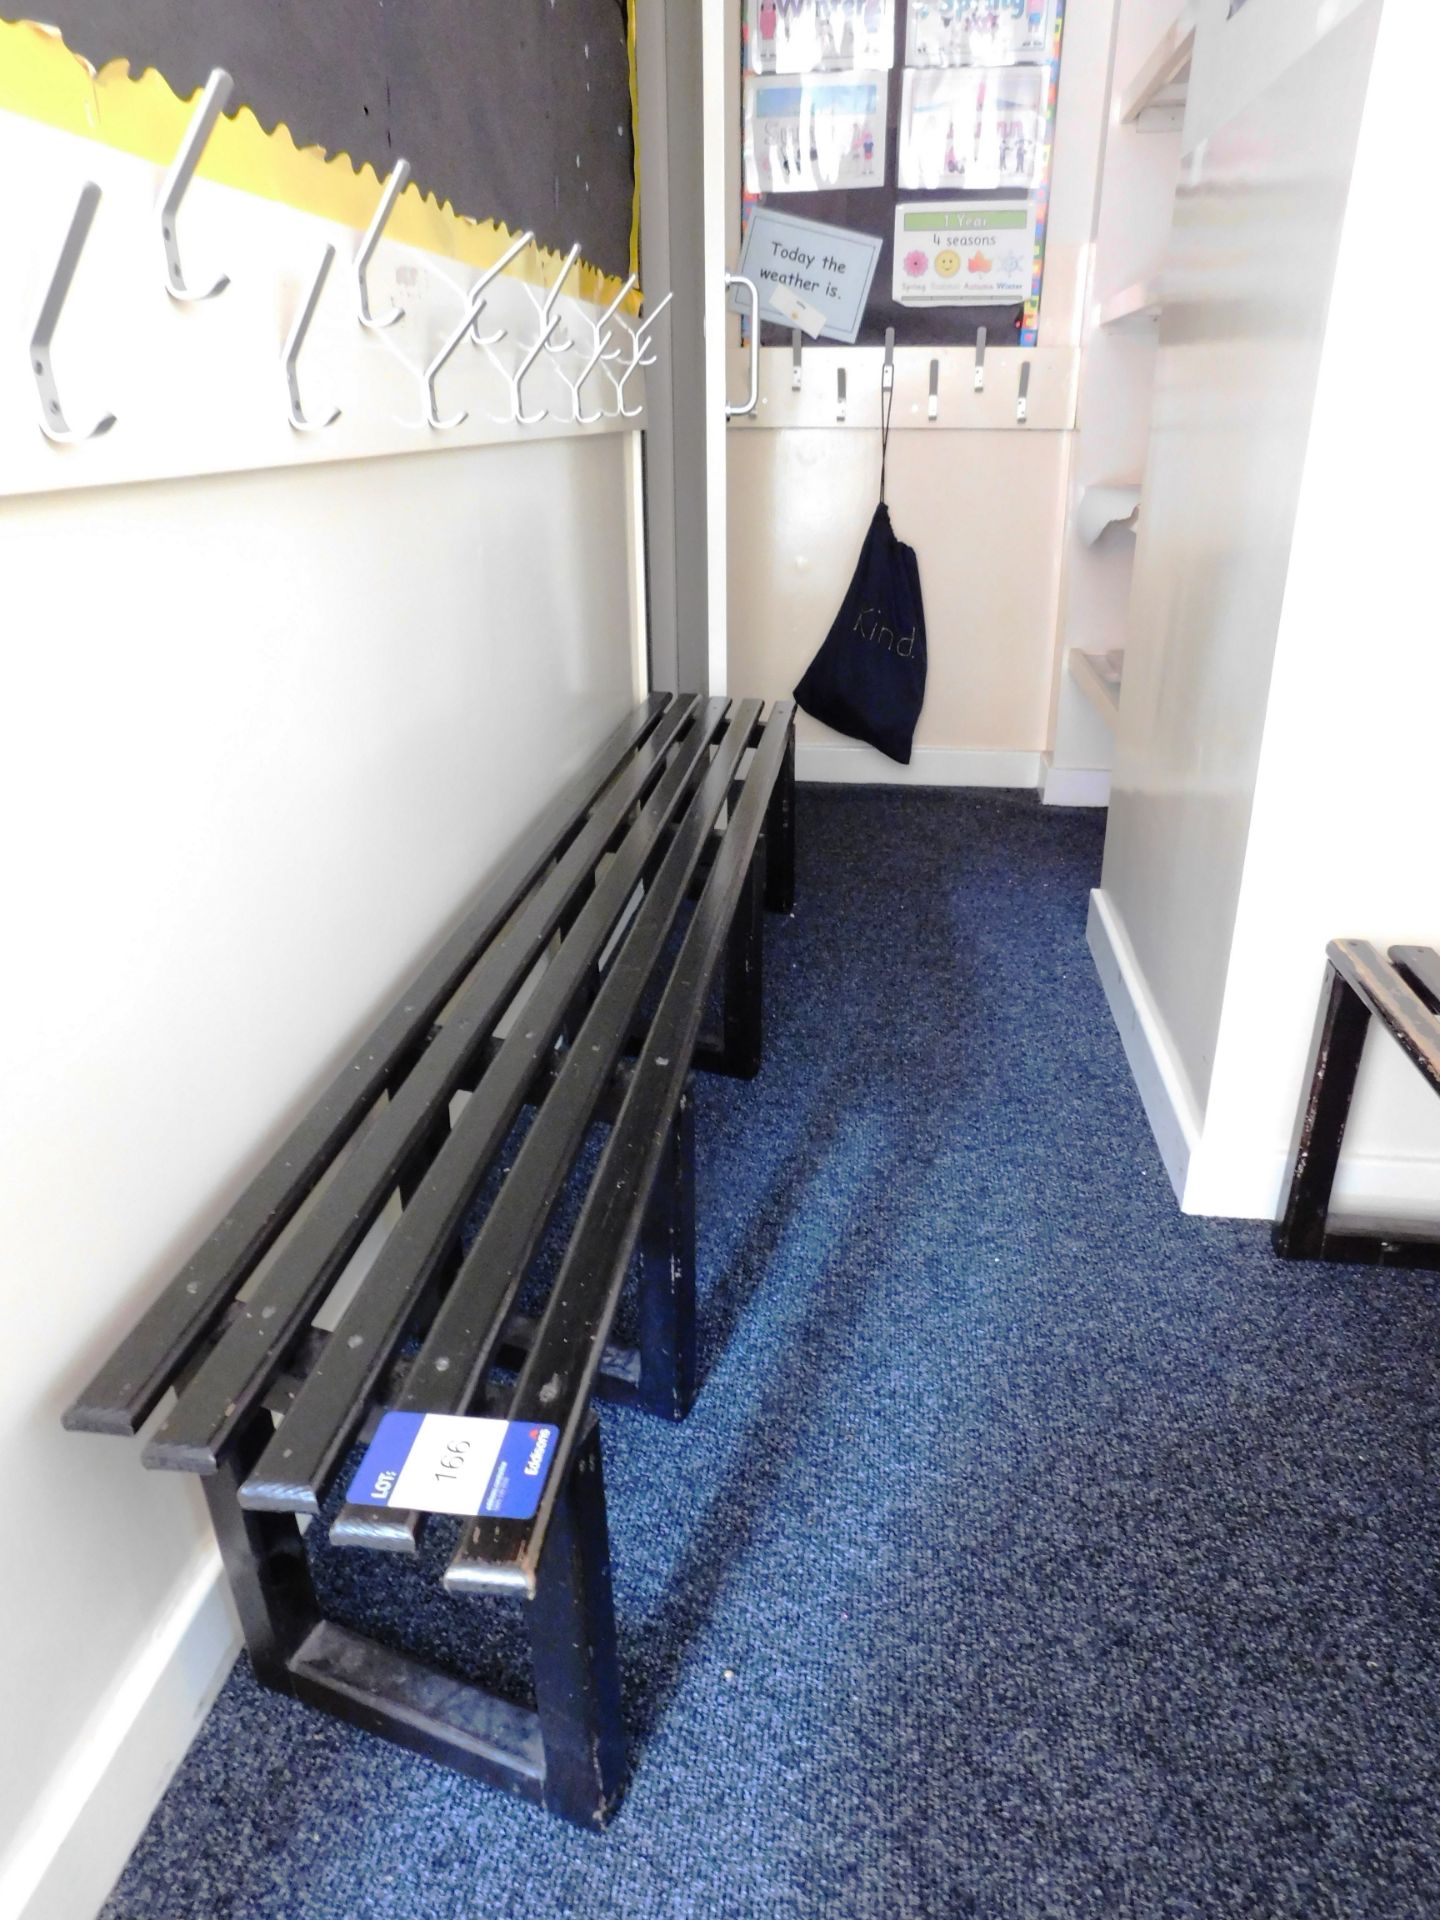 2 slatted changing room Benches